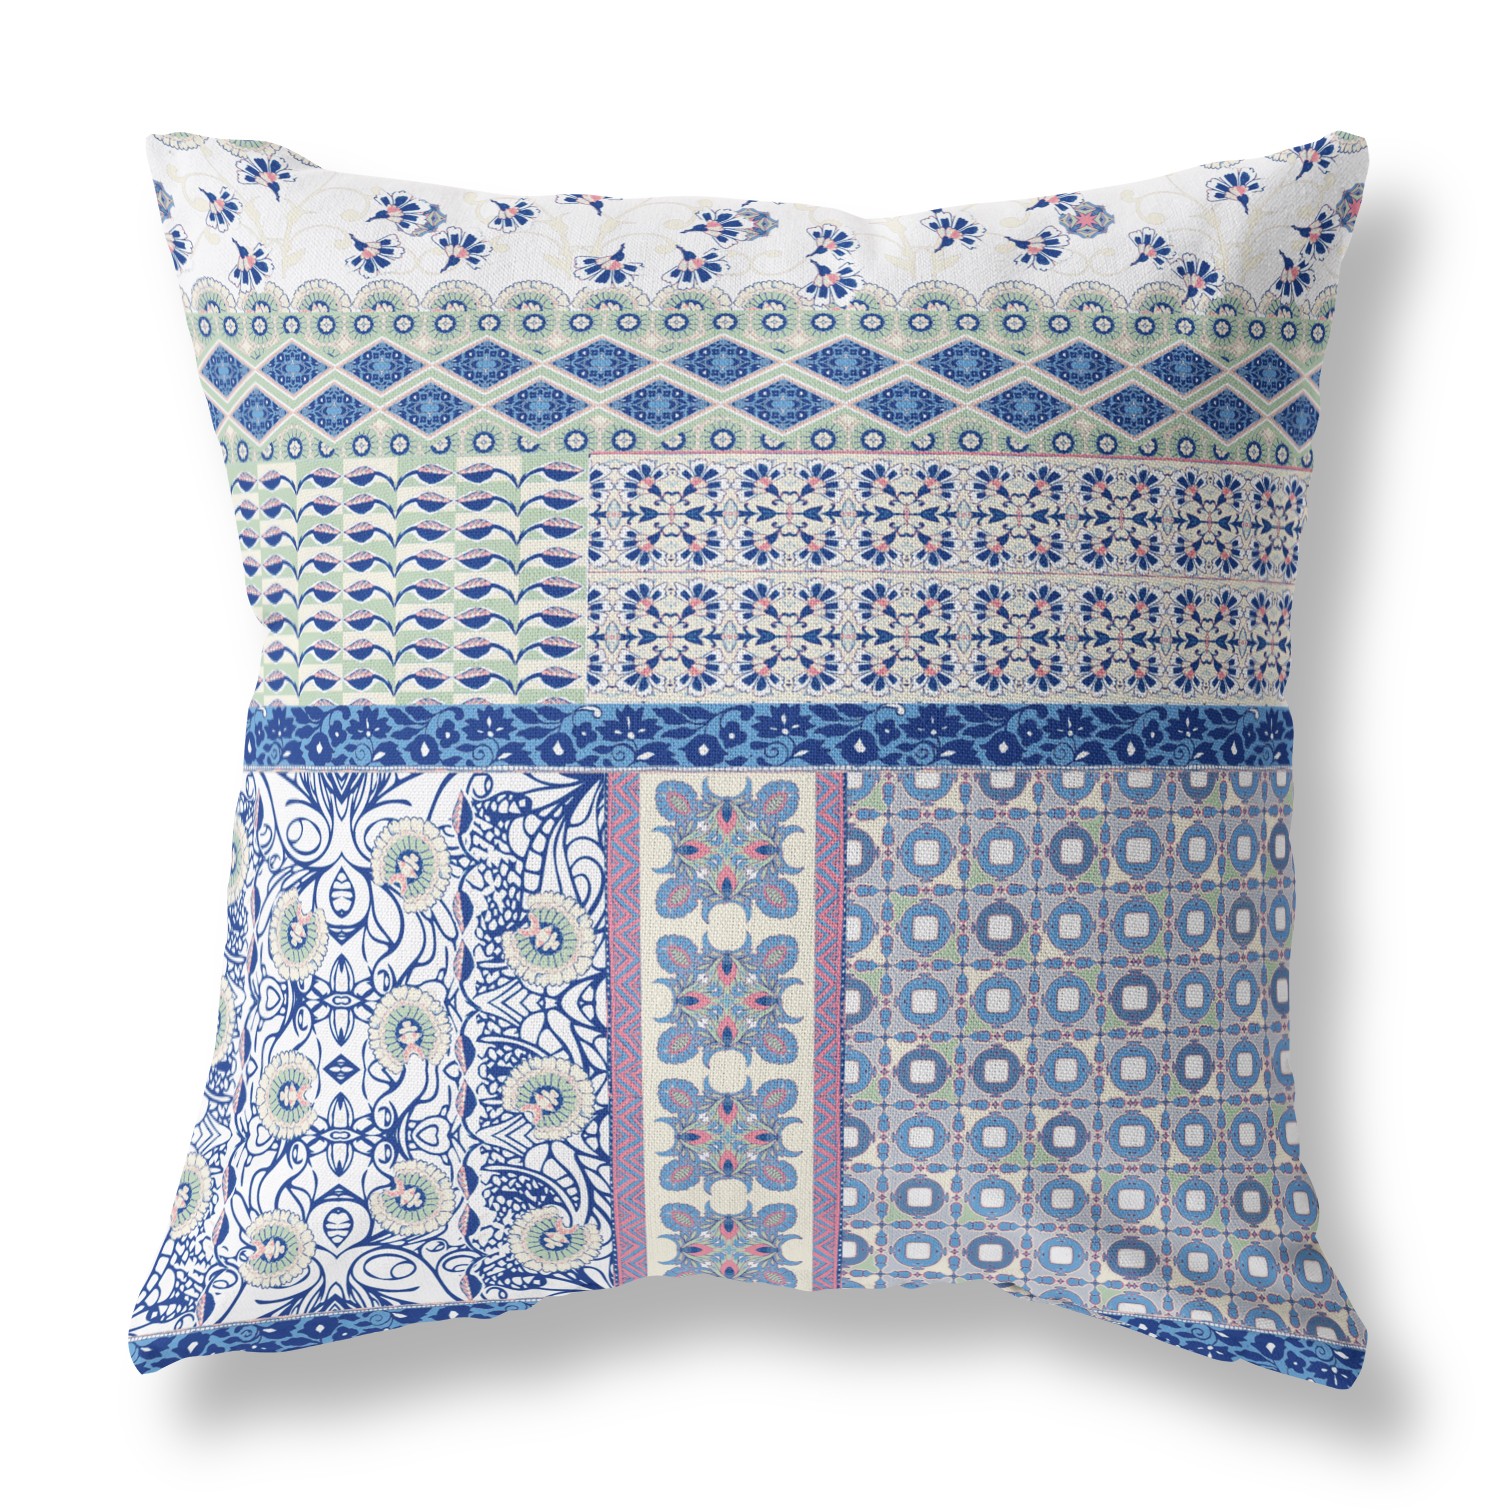 26” Blue Lavender White Patch Indoor Outdoor Zippered Throw Pillow-410953-1